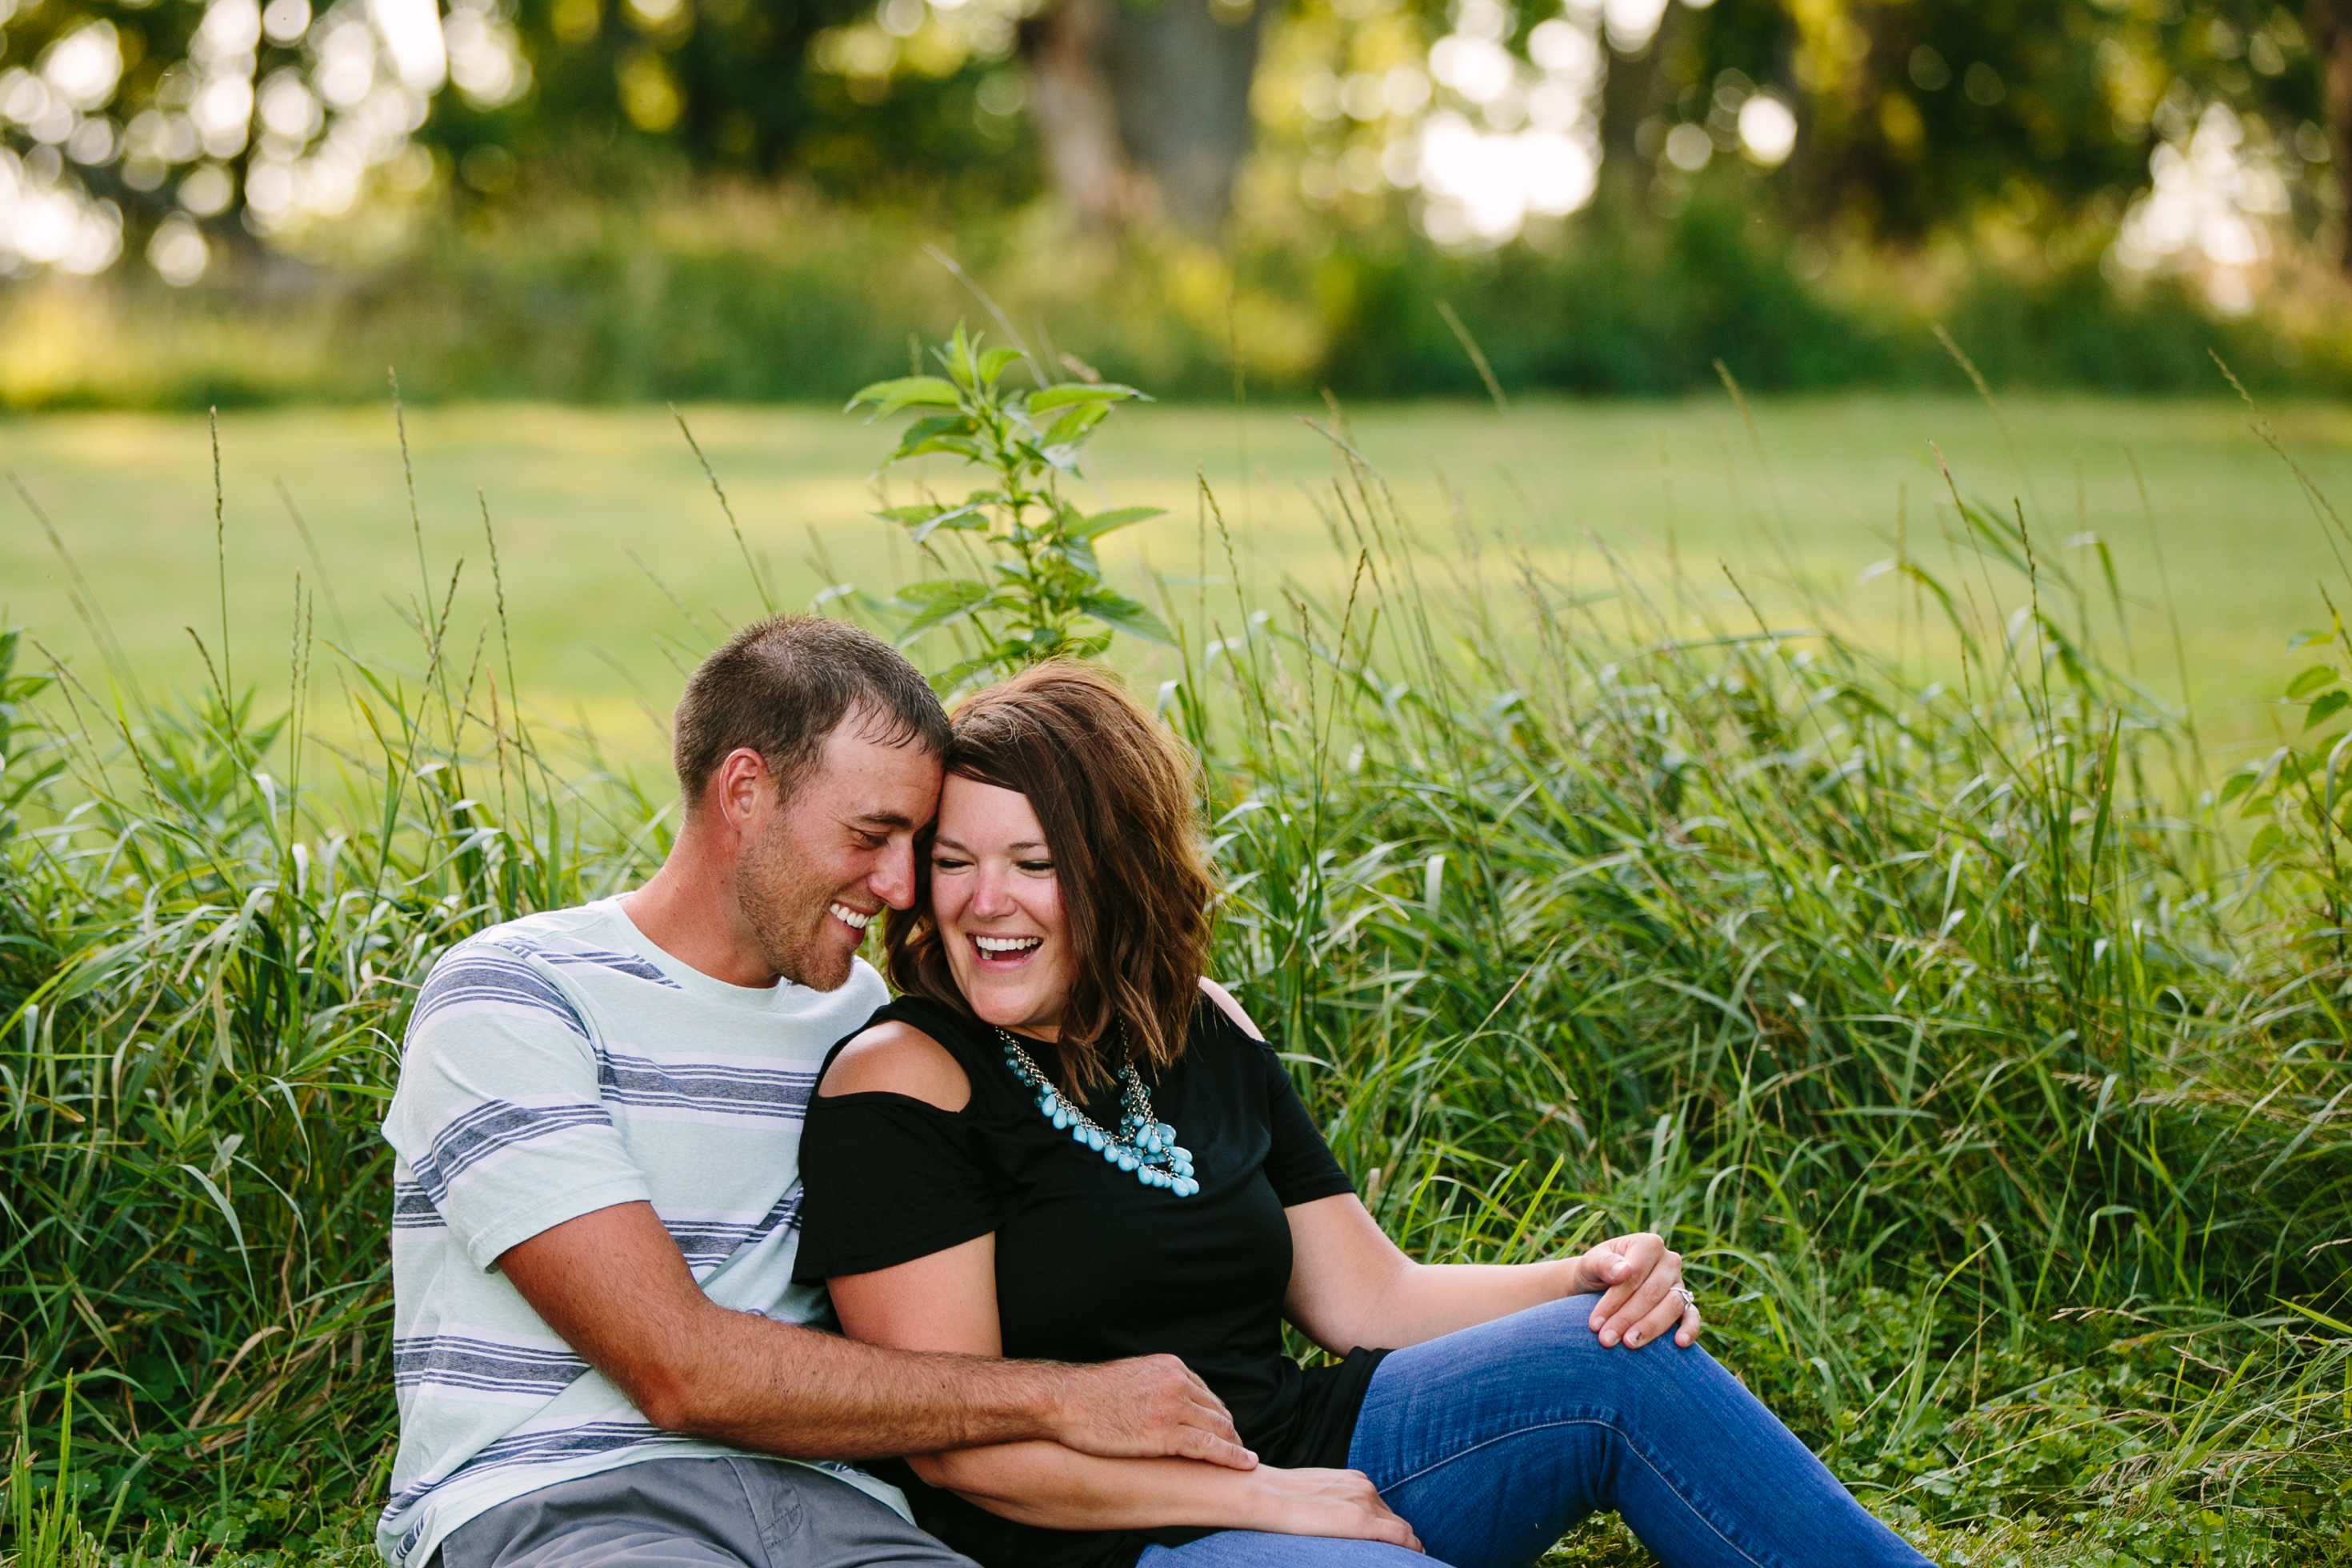 outdoor dubuque engagement session by catherine furlin photography, couple sitting in the grass